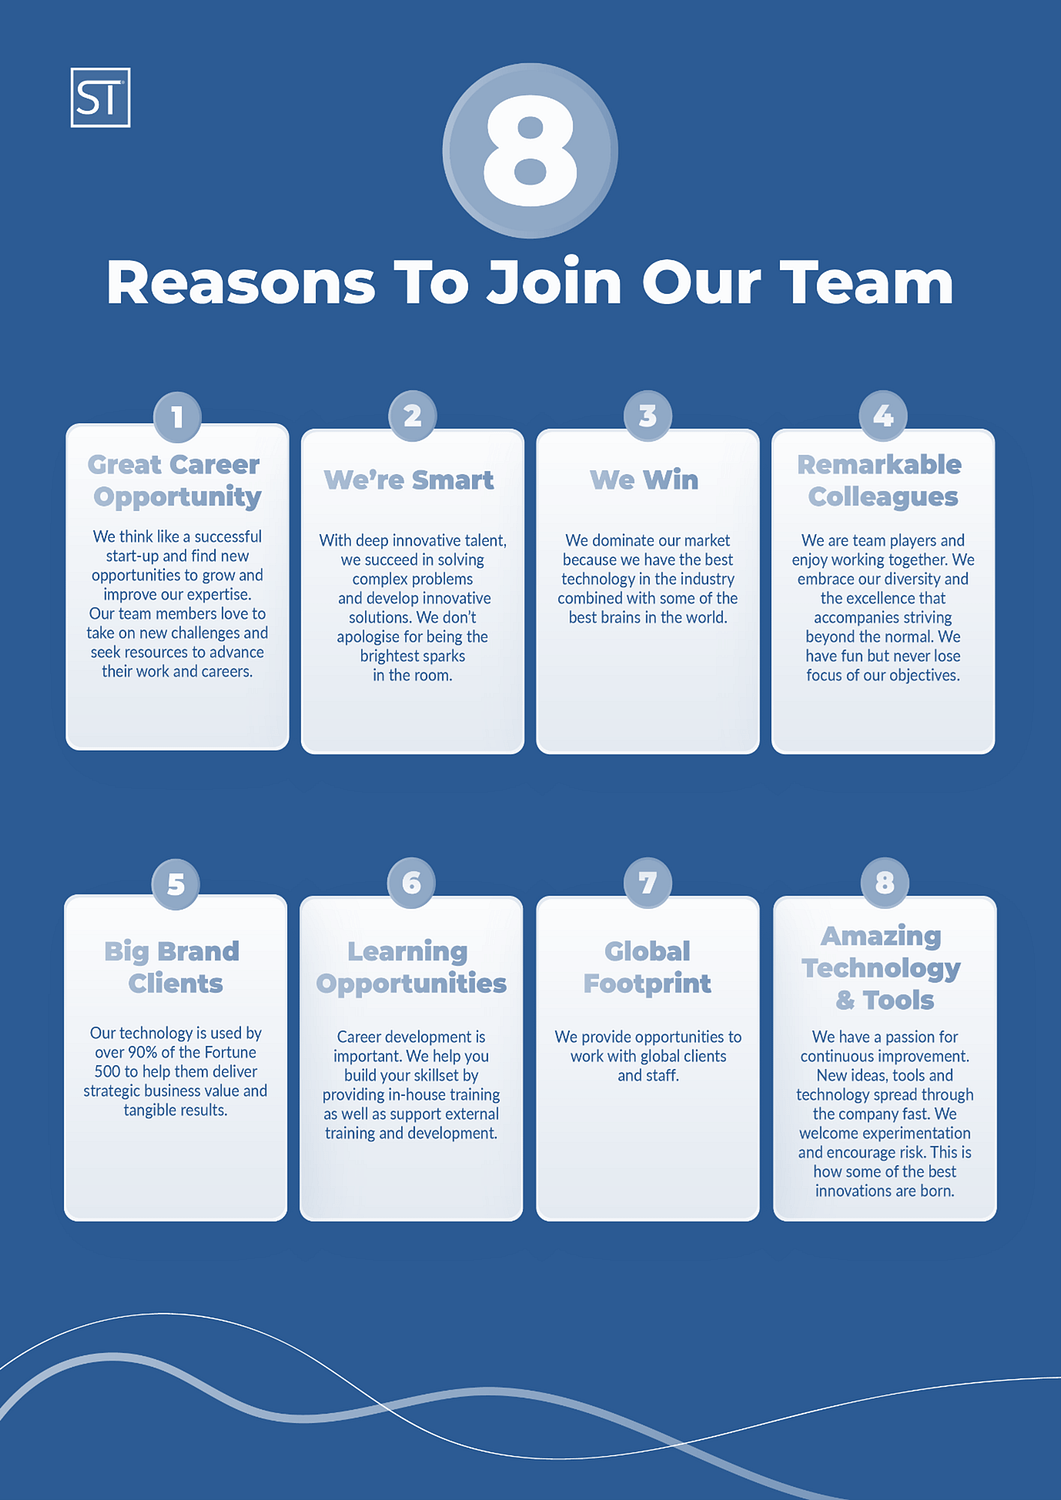 Reasons to join the team